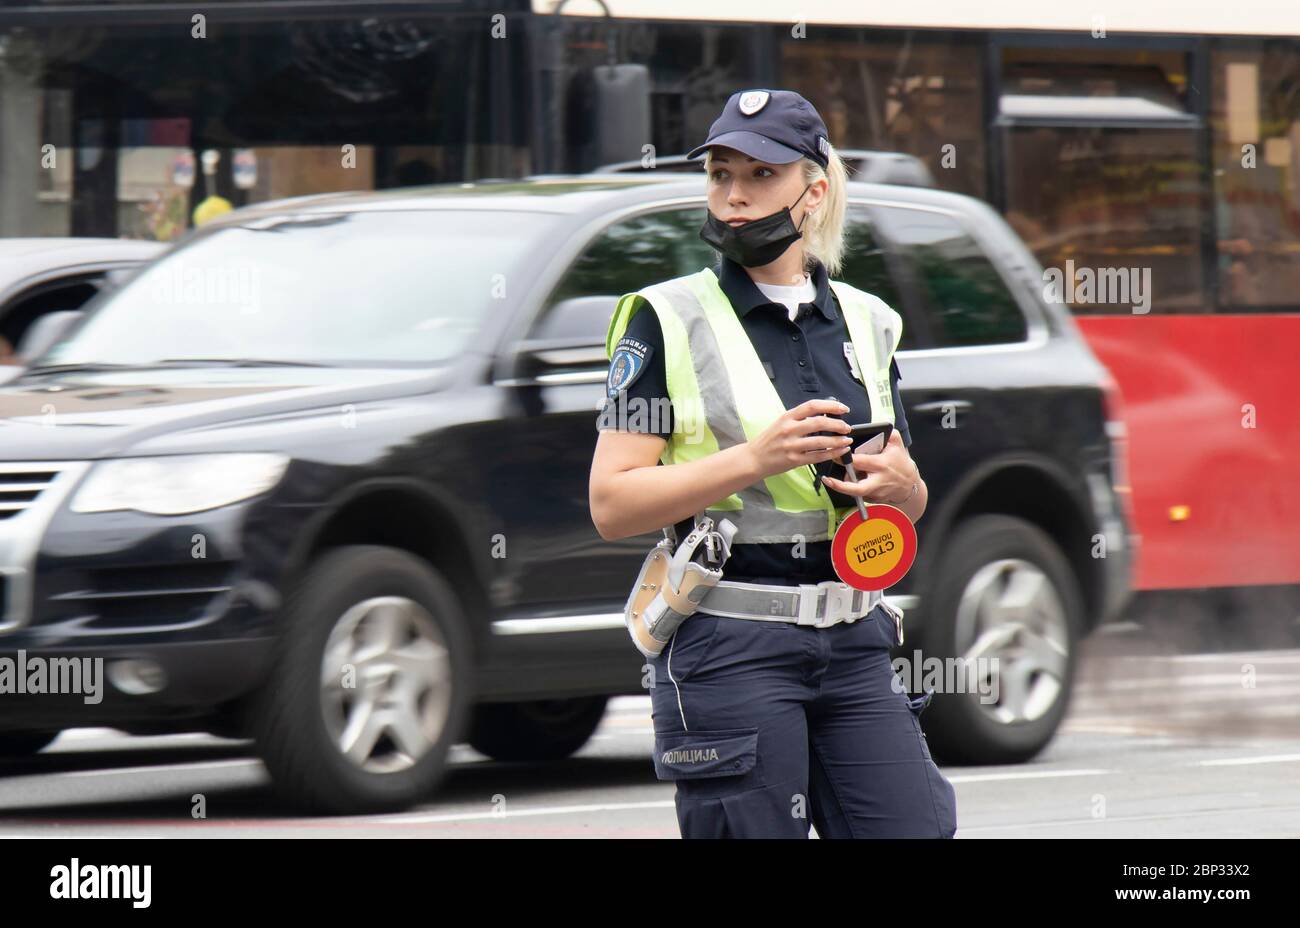 Belgrade, Serbia - May 15, 2020: Policewoman on duty, standing in the intersection with traffic in motion blur Stock Photo